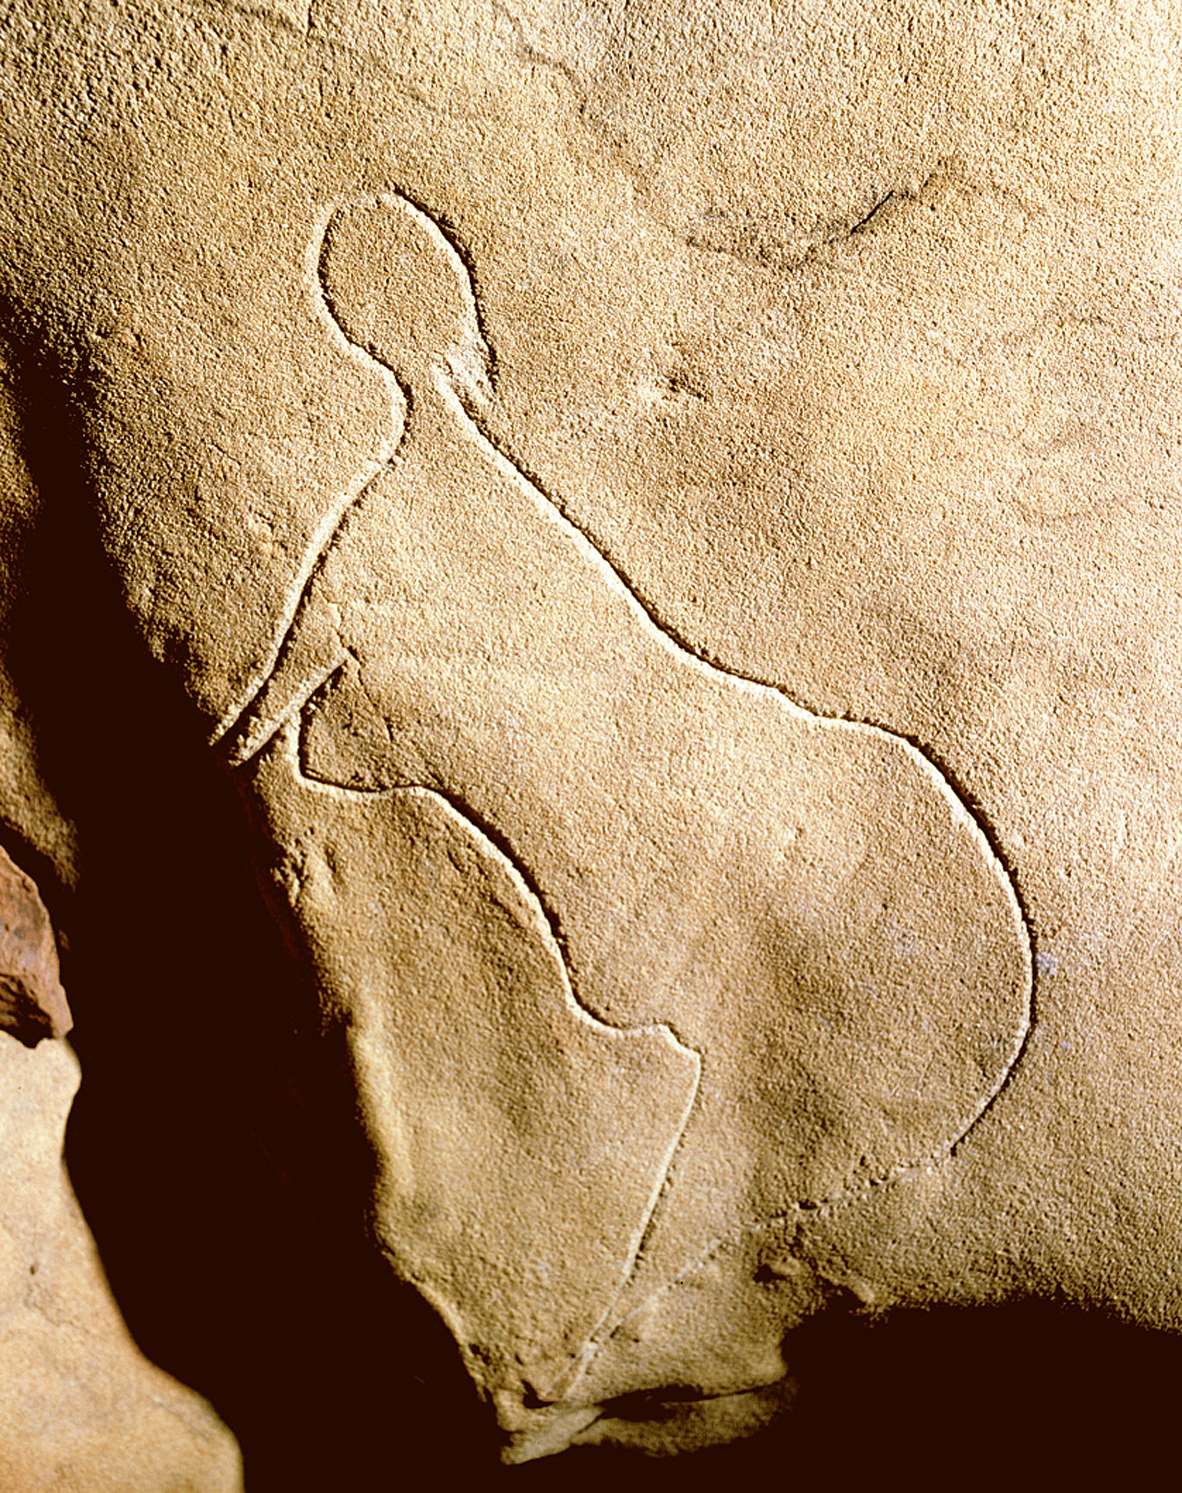 A 25,000-year-old engraving of a woman at Cussac cave in France. The cave contains over 150 Paleolithic artworks as well as several human remains.jpg